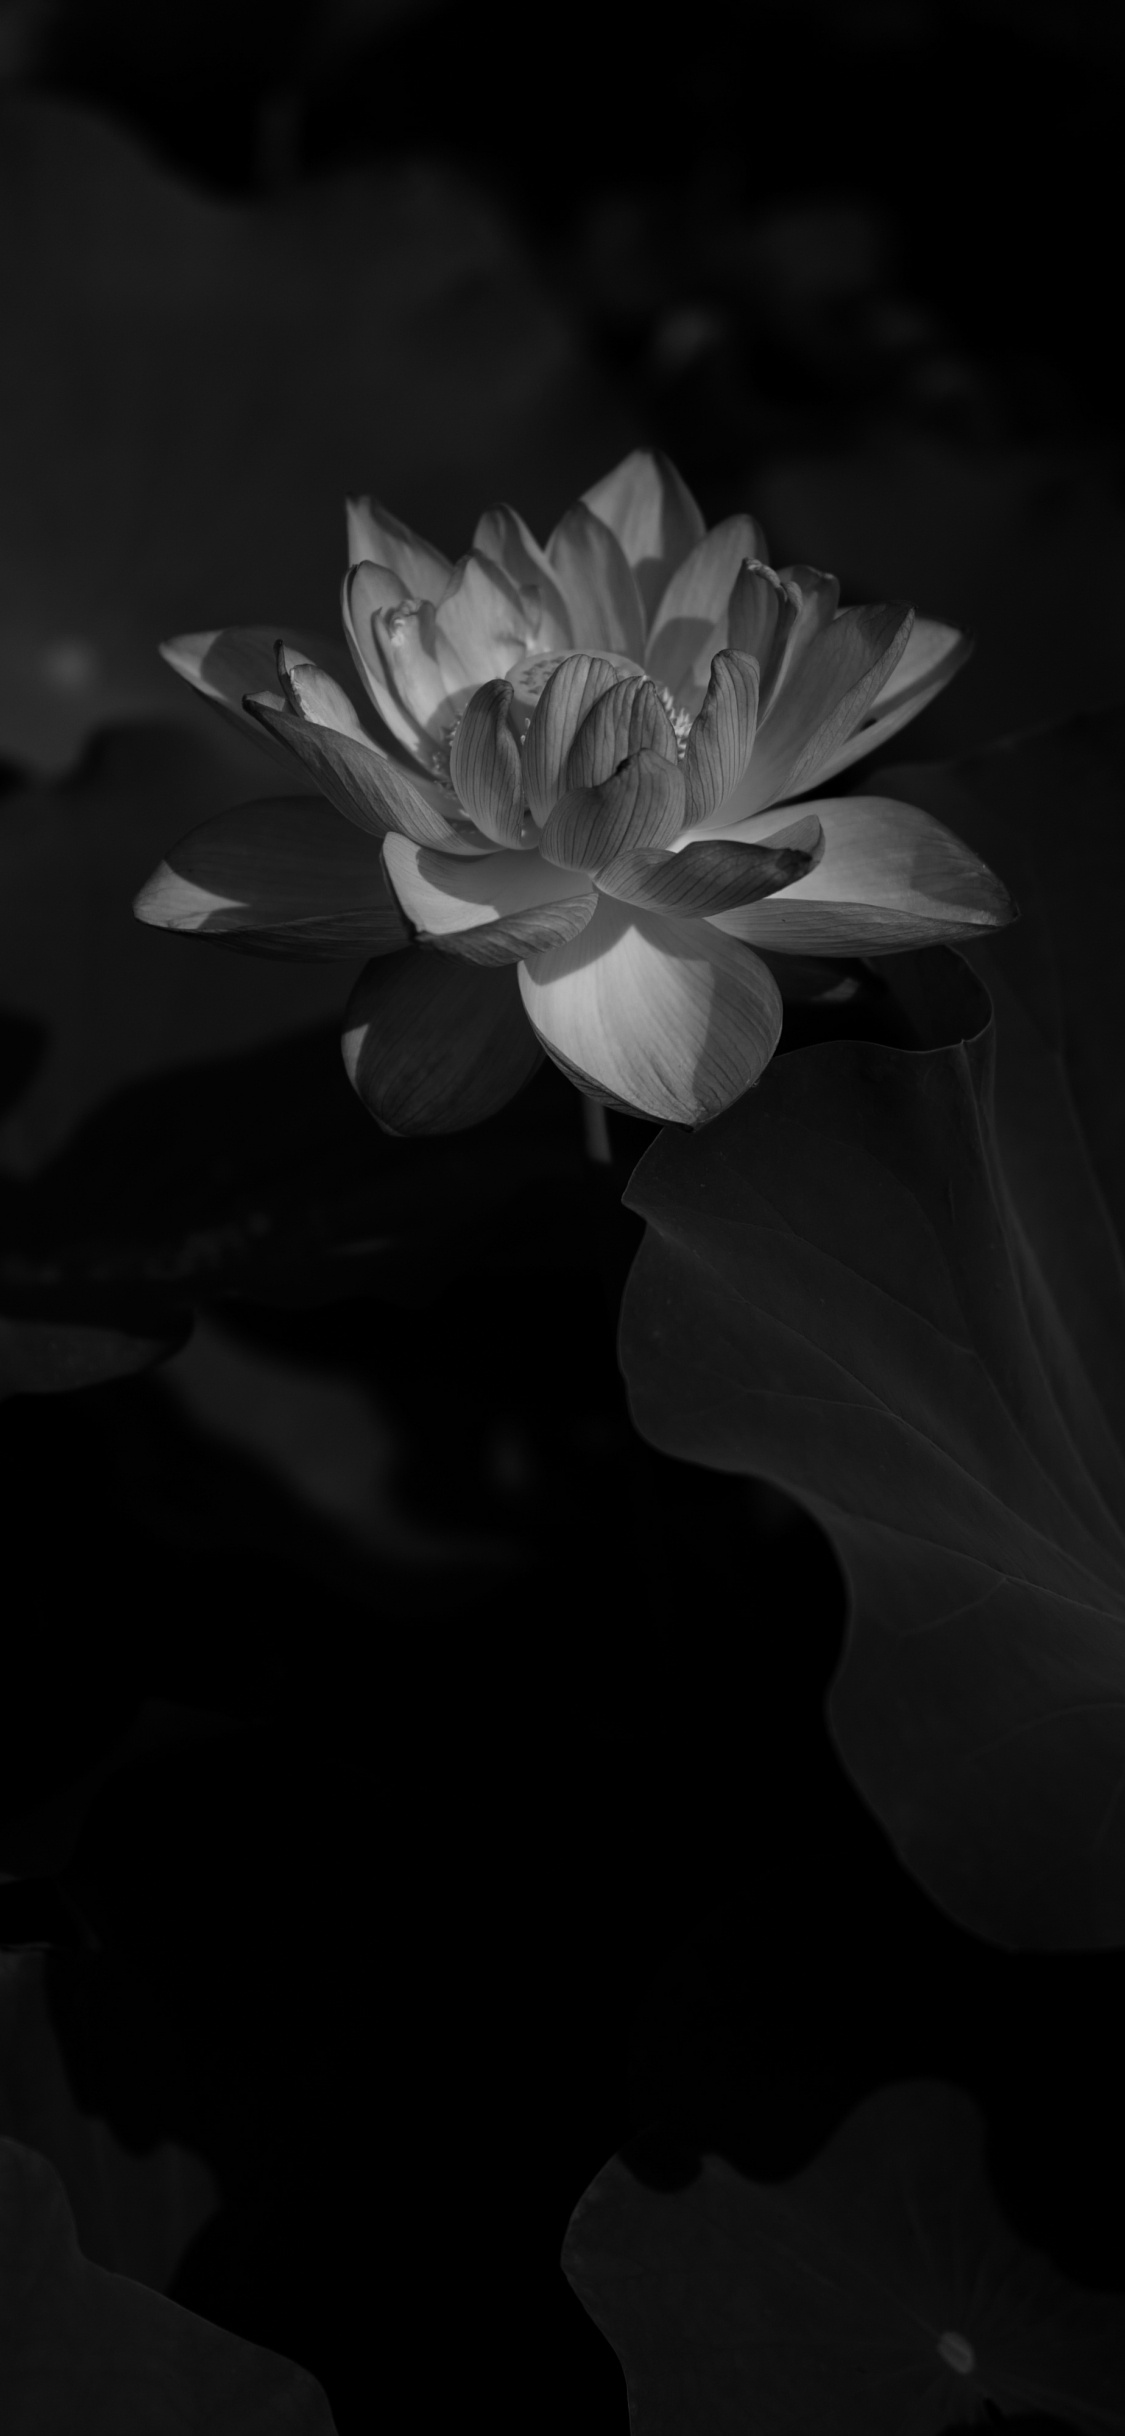 Grayscale Photo of a Flower. Wallpaper in 1125x2436 Resolution